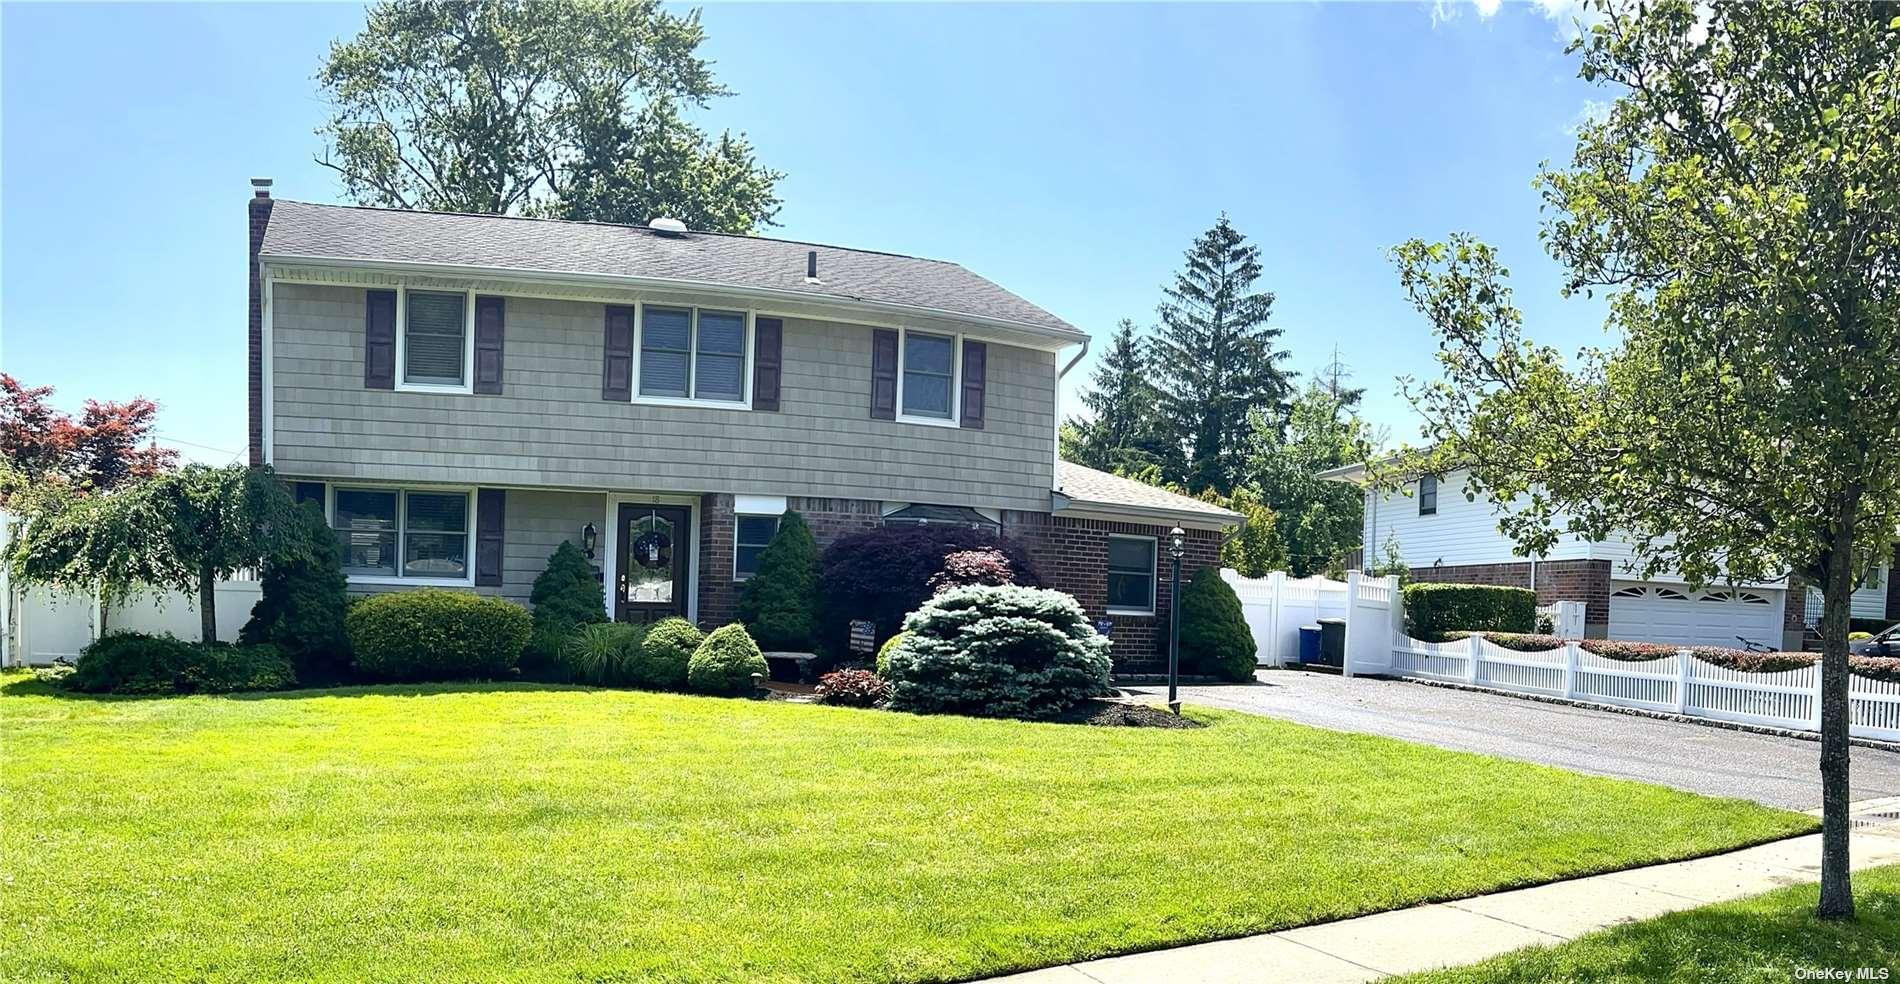 18 Ardmore Place in Long Island, Kings Park, NY 11754